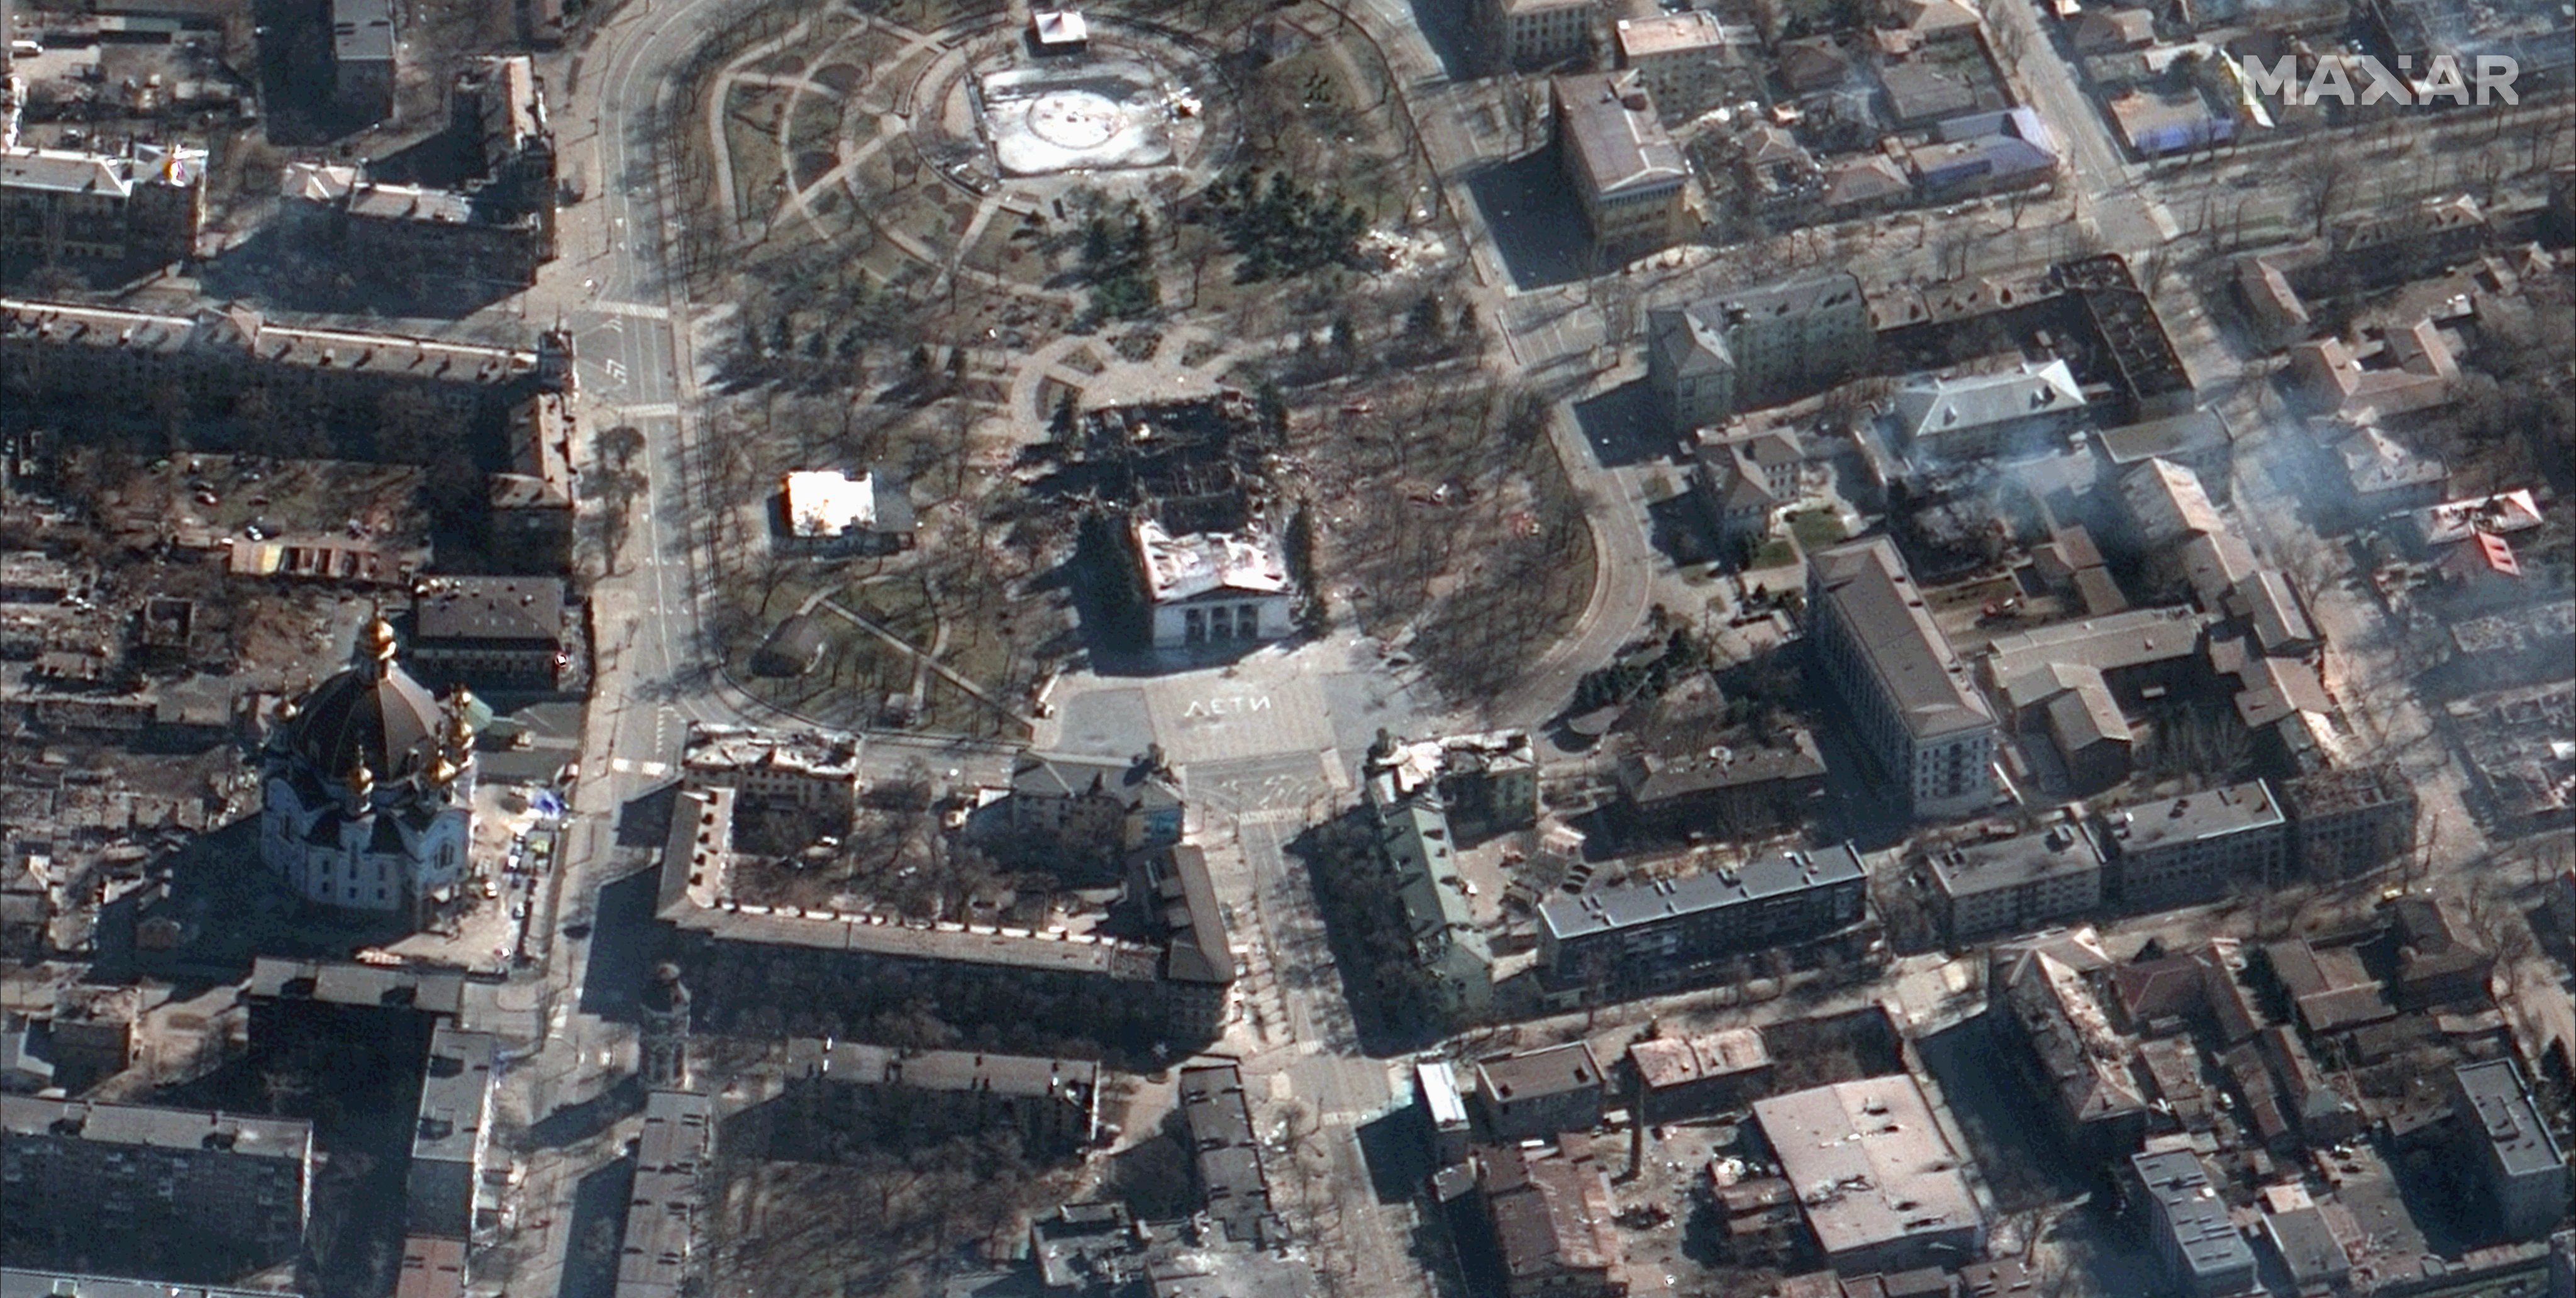 Russian forces are trying to wipe Mariupol "off the face of the Earth" - en